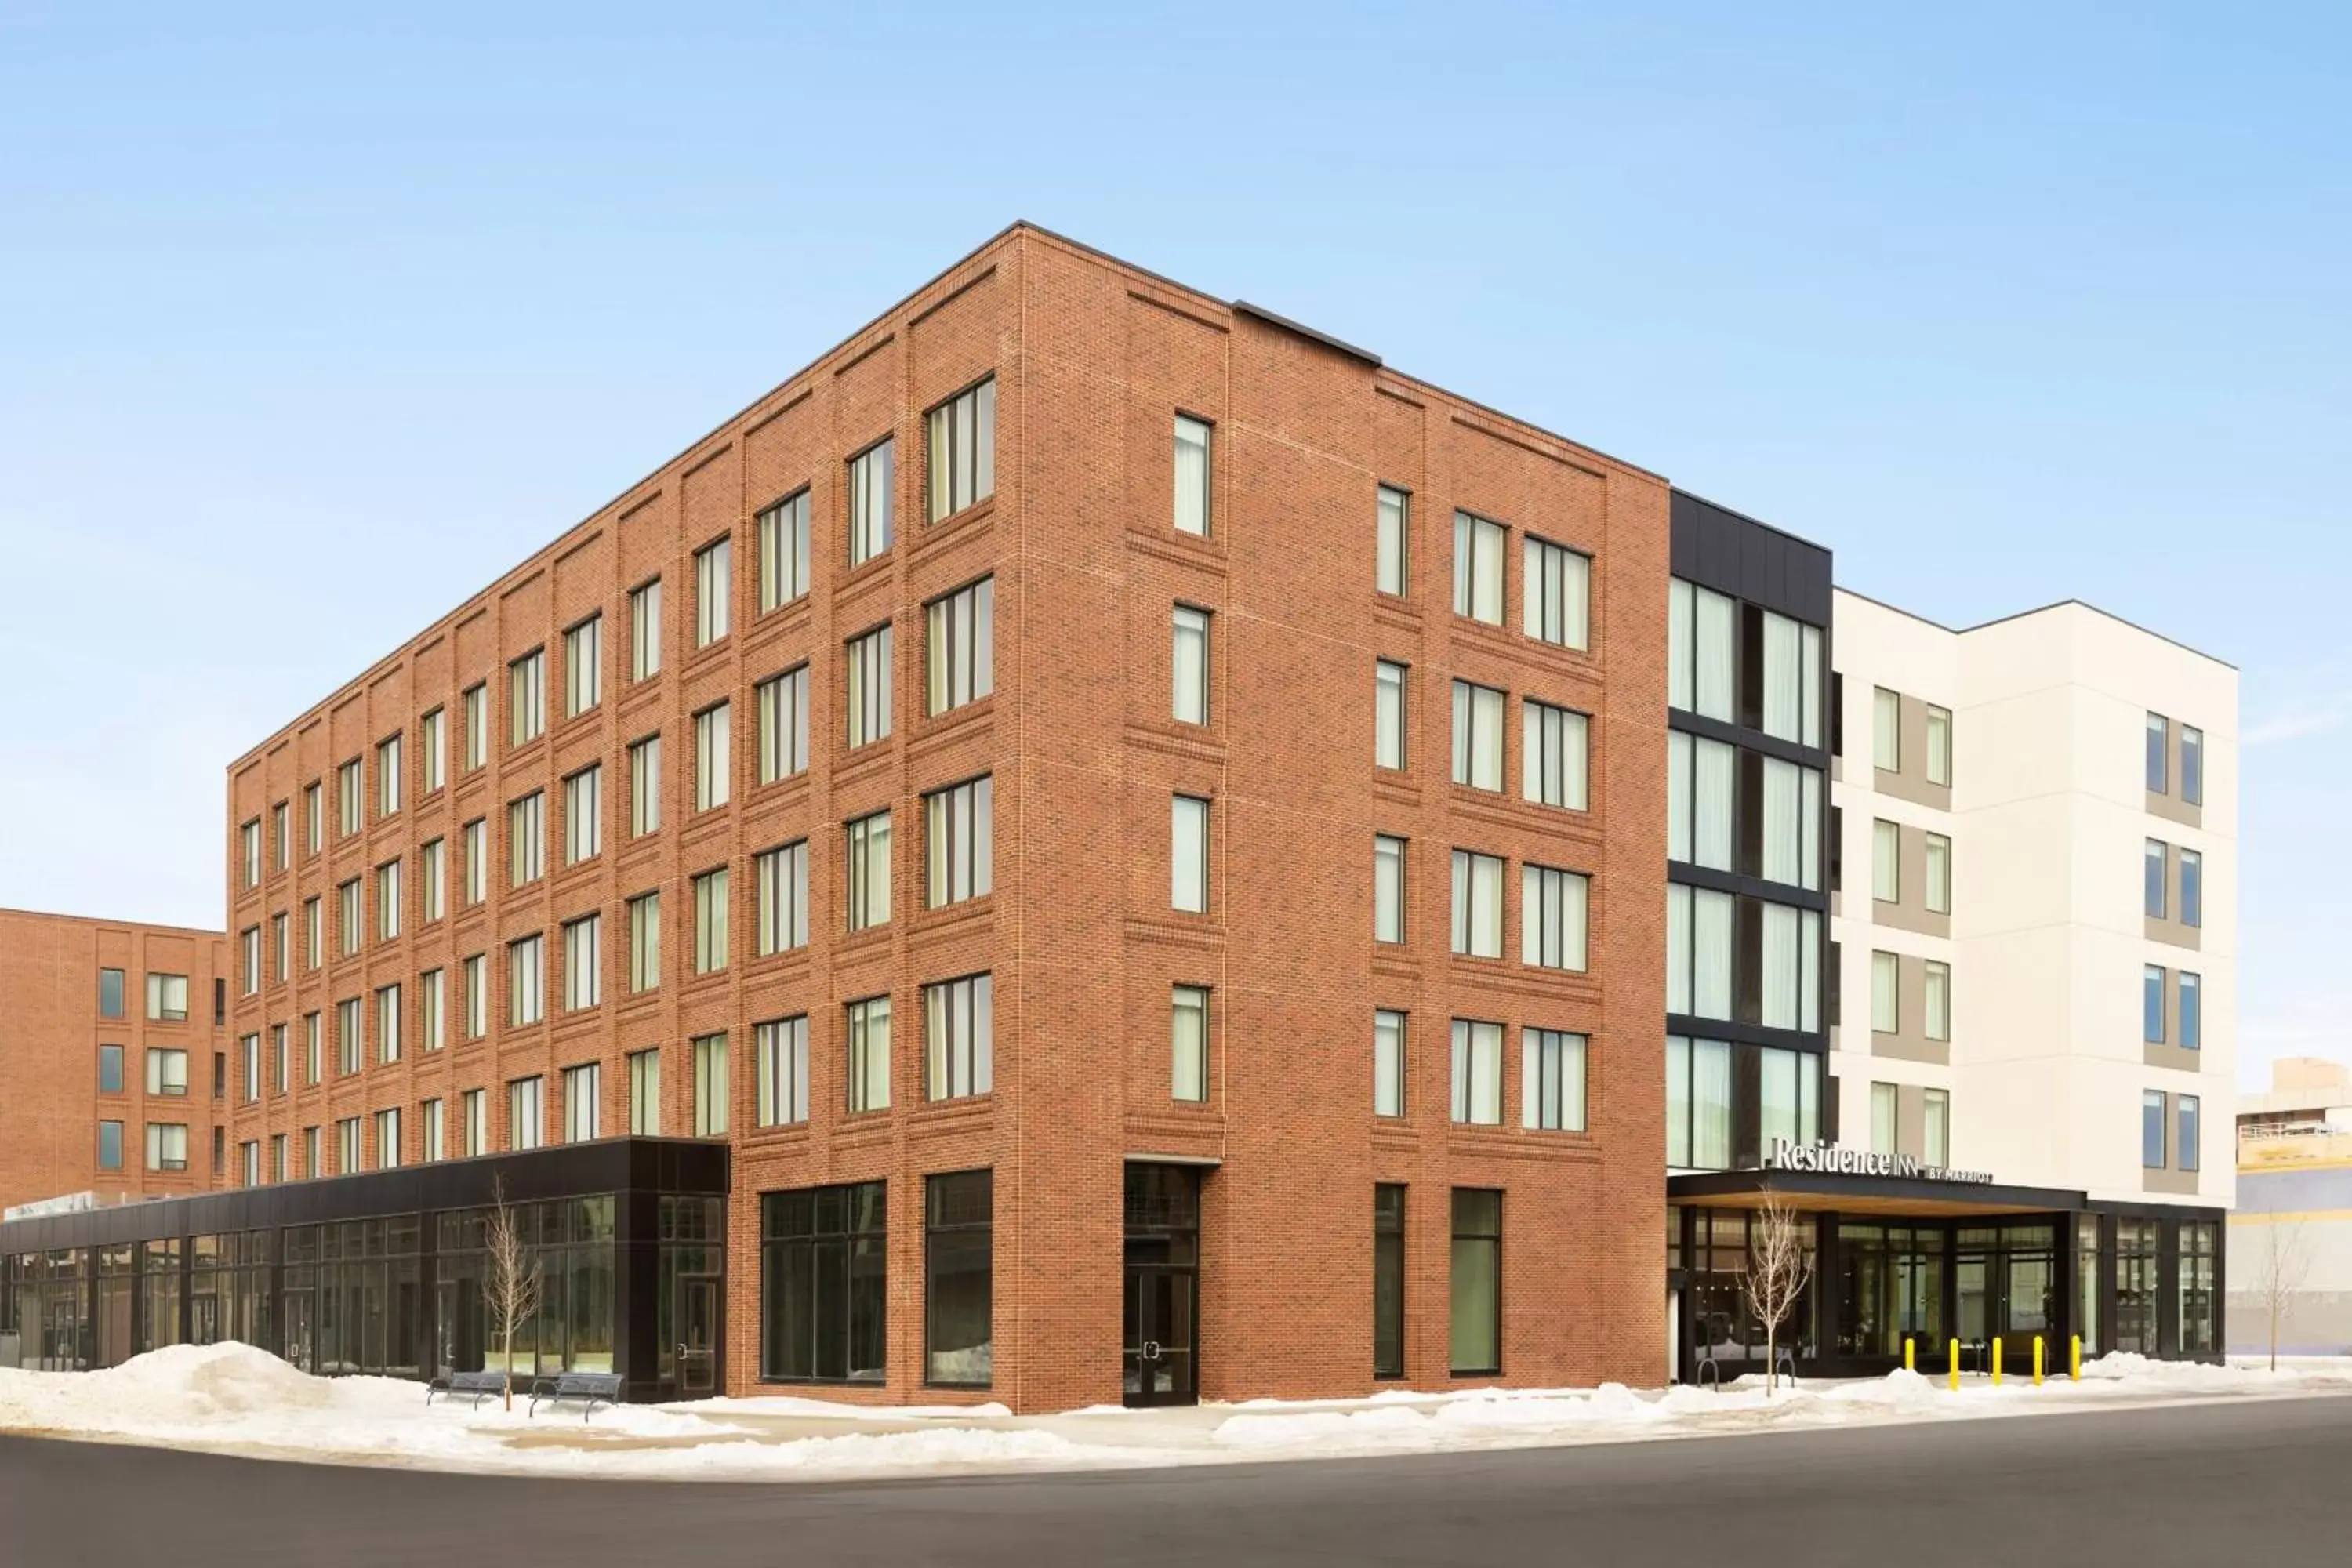 Property Building in Residence Inn by Marriott Missoula Downtown